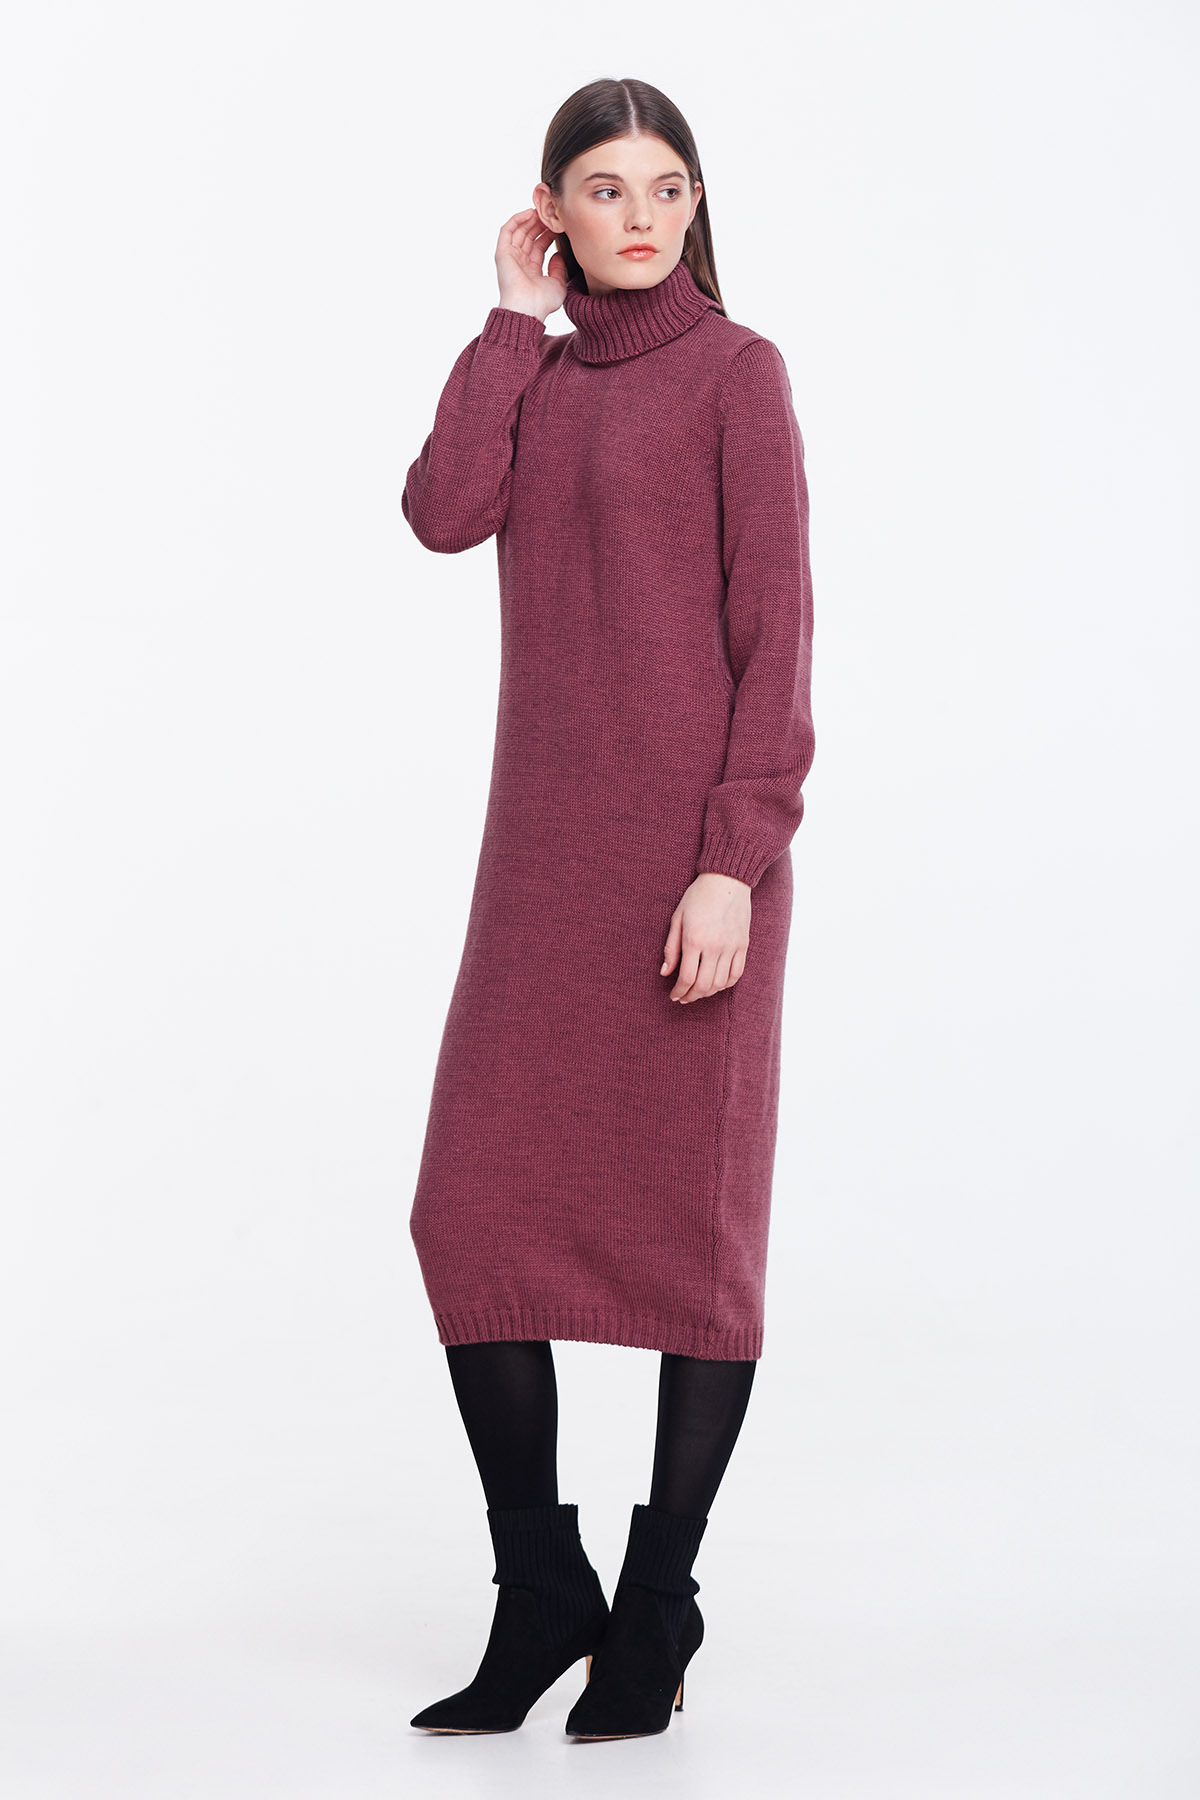 Wine knit dress with a stand up collar, photo 4